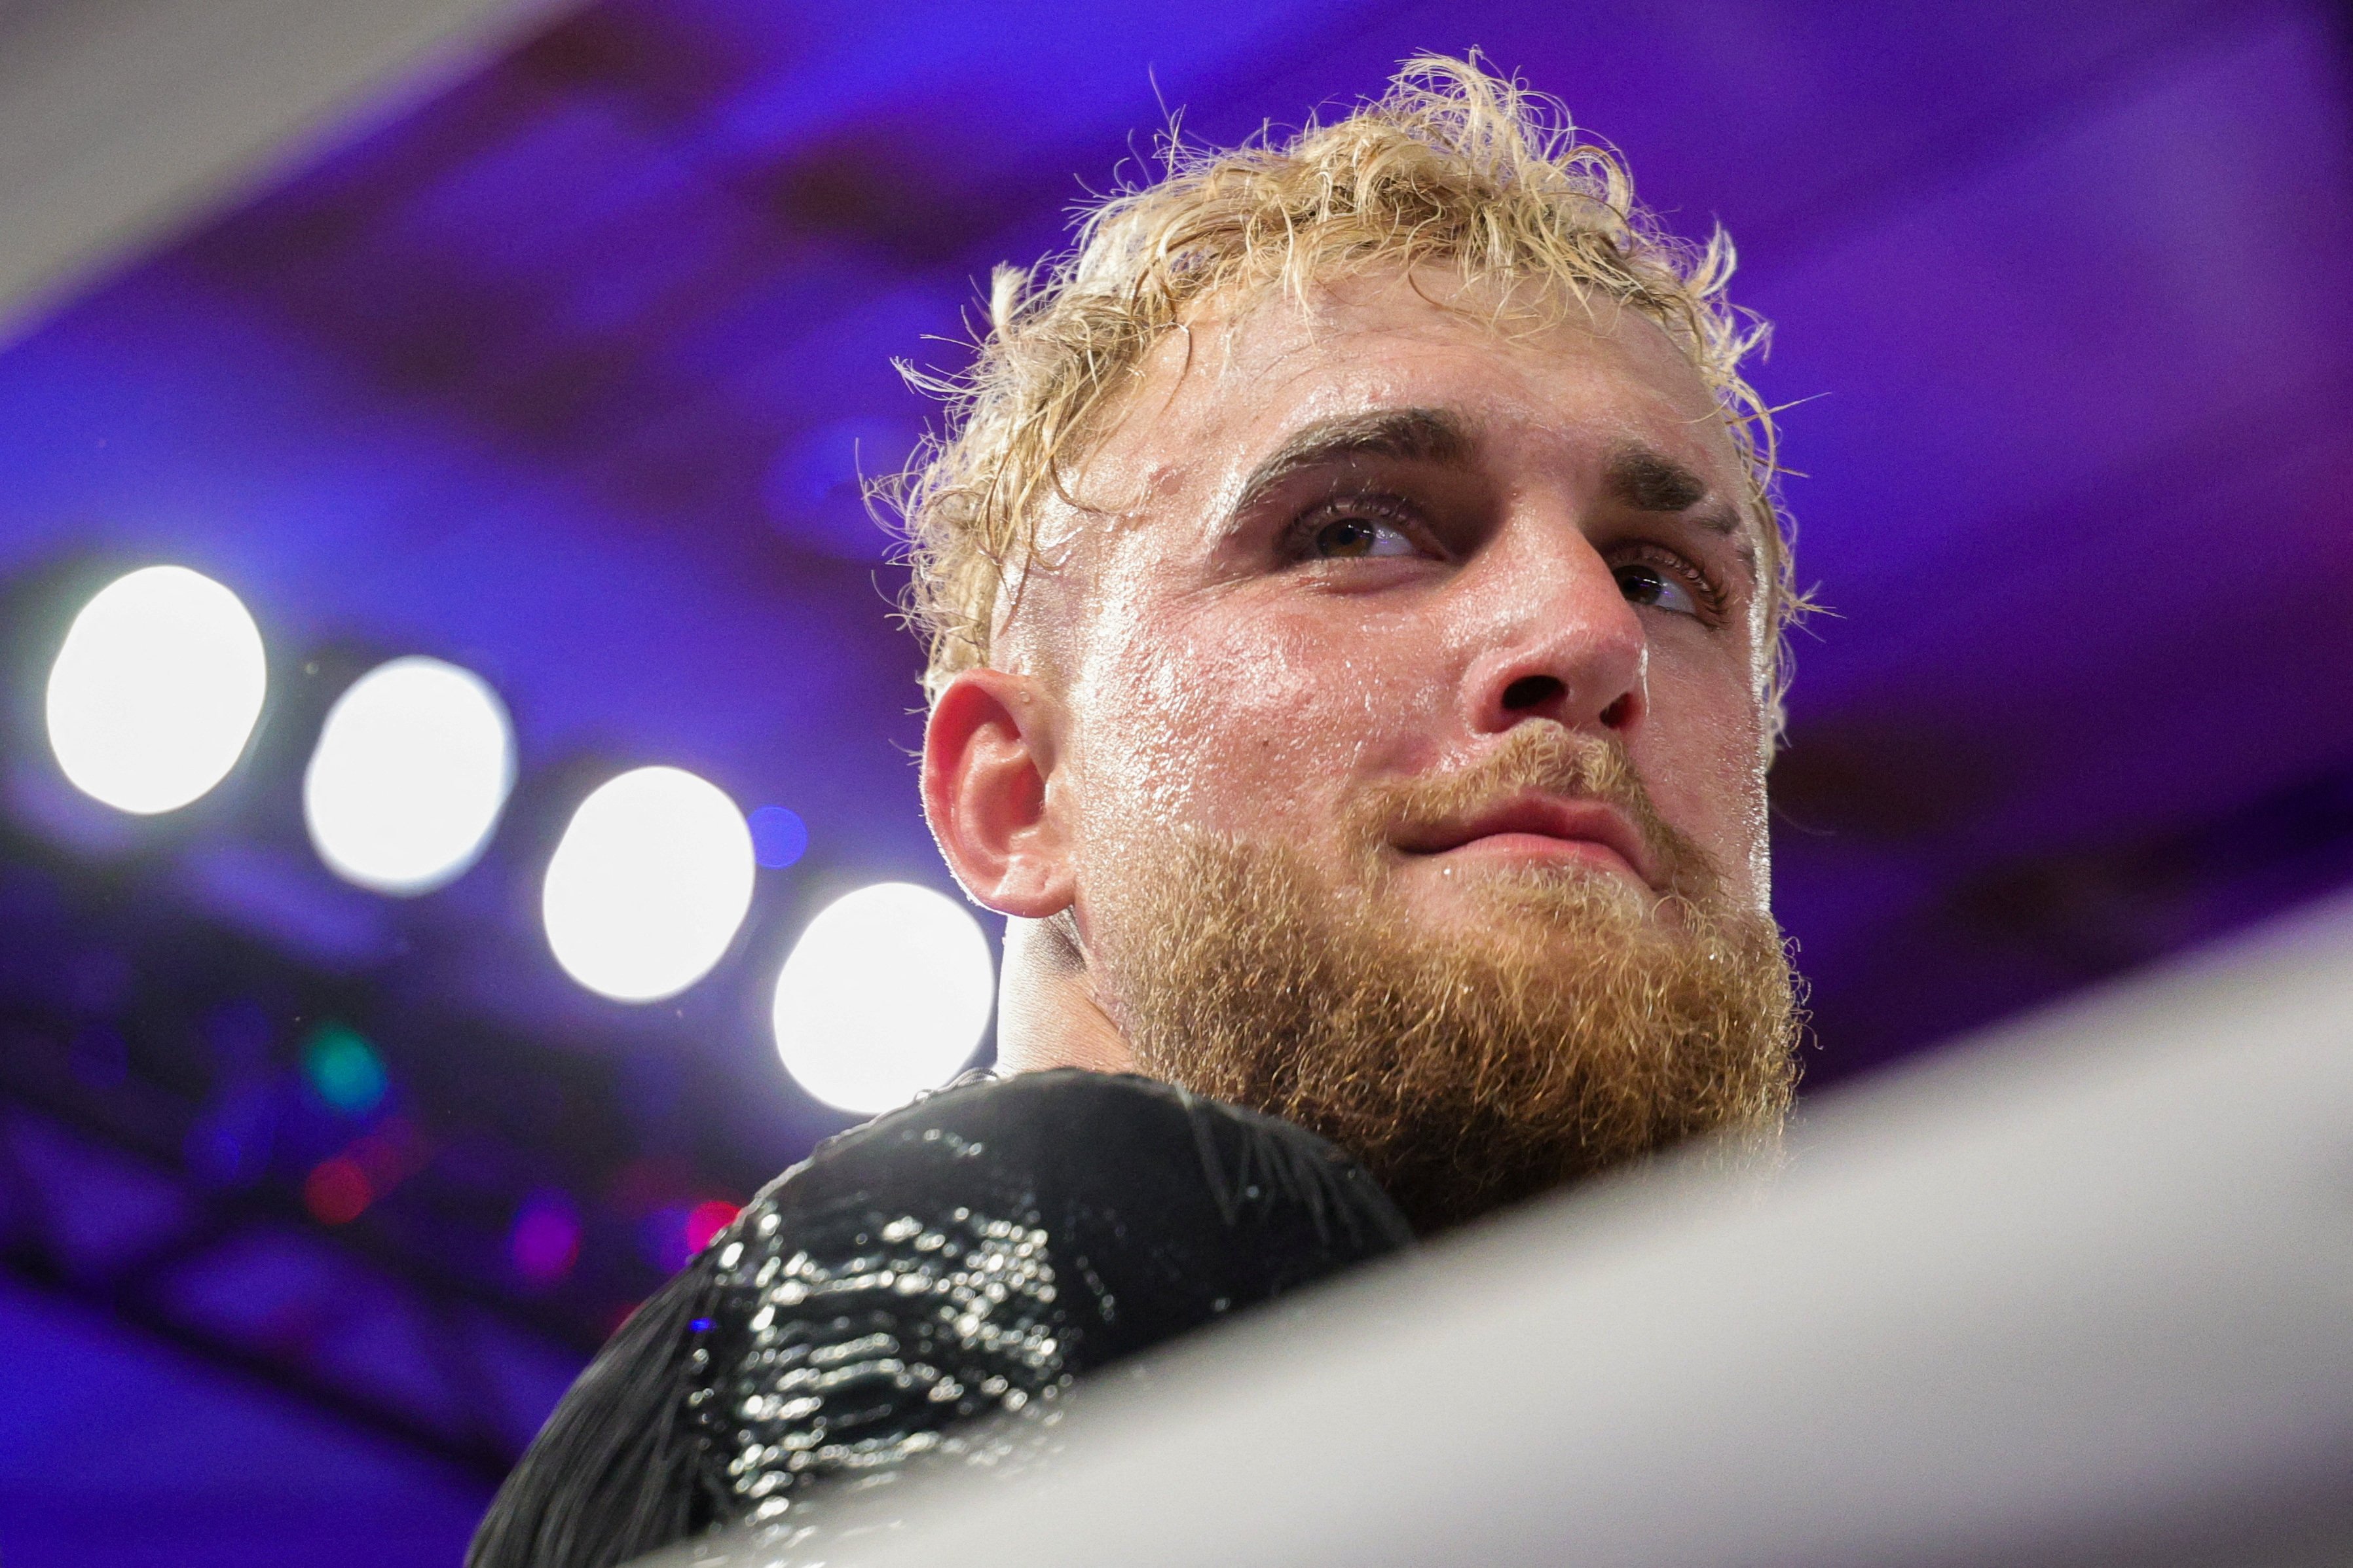 Jake Paul will work with USA team boxers in Paris next year. Photo: USA Today Sports